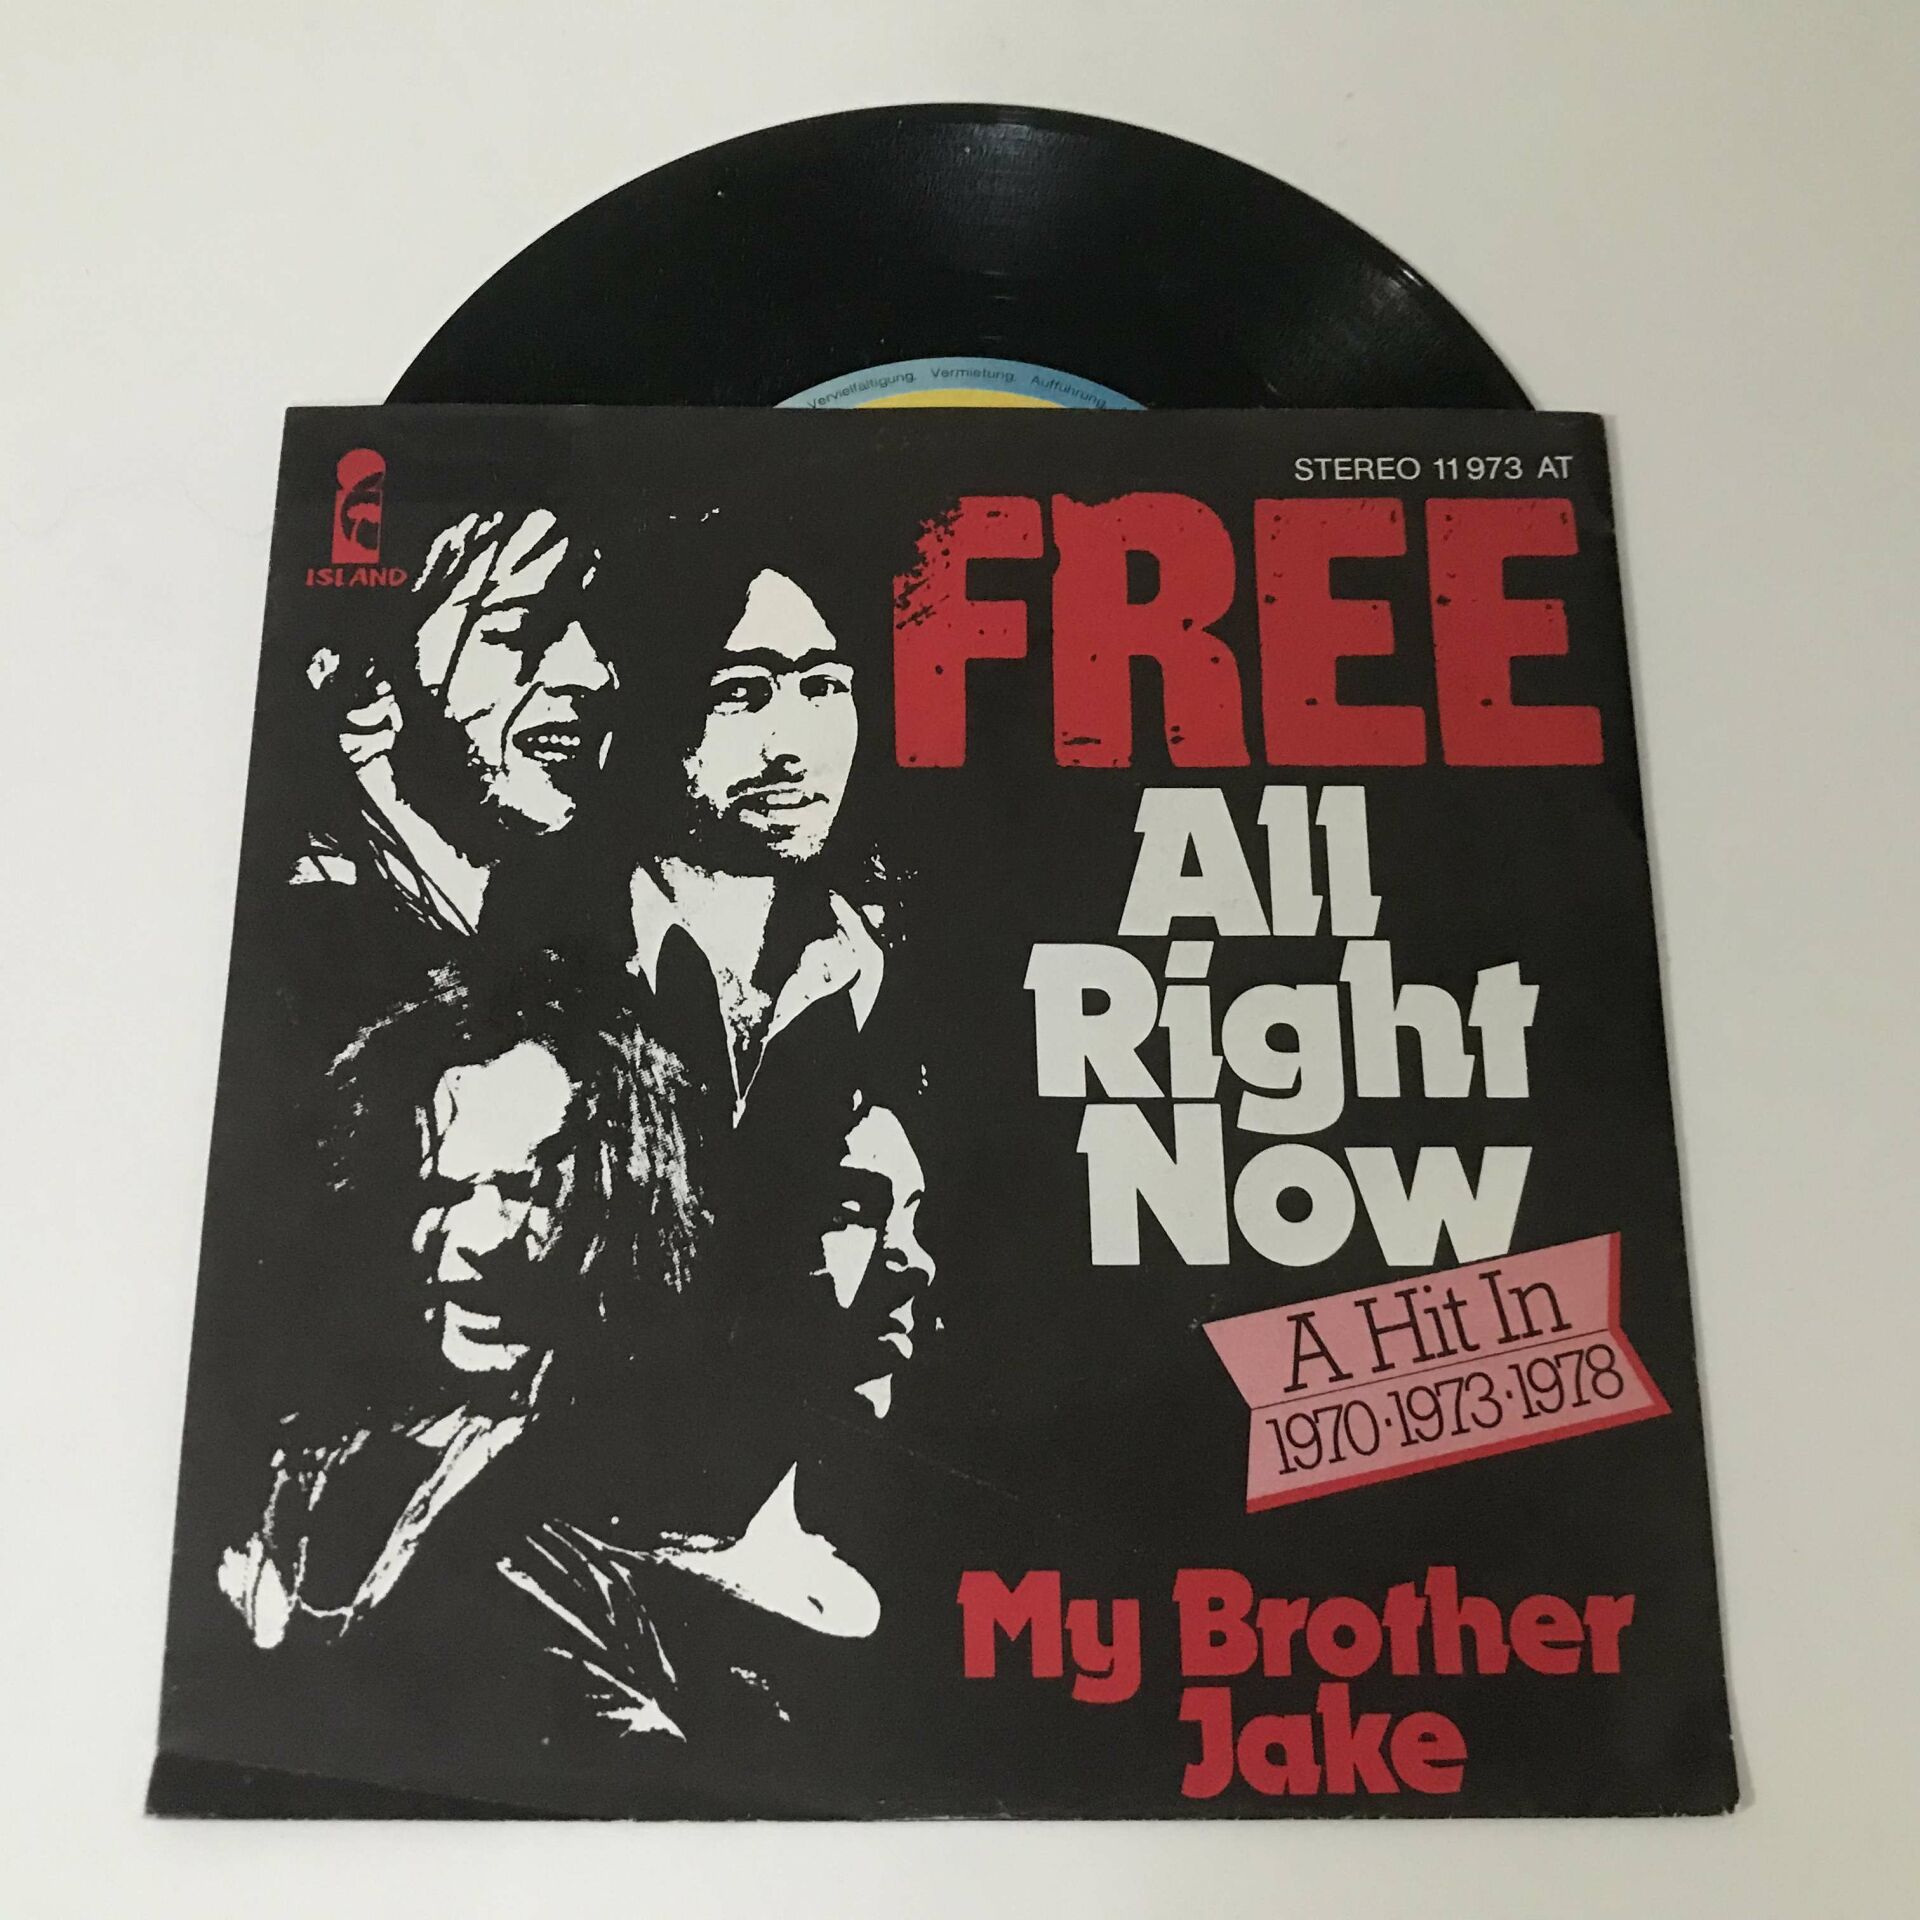 Free – All Right Now